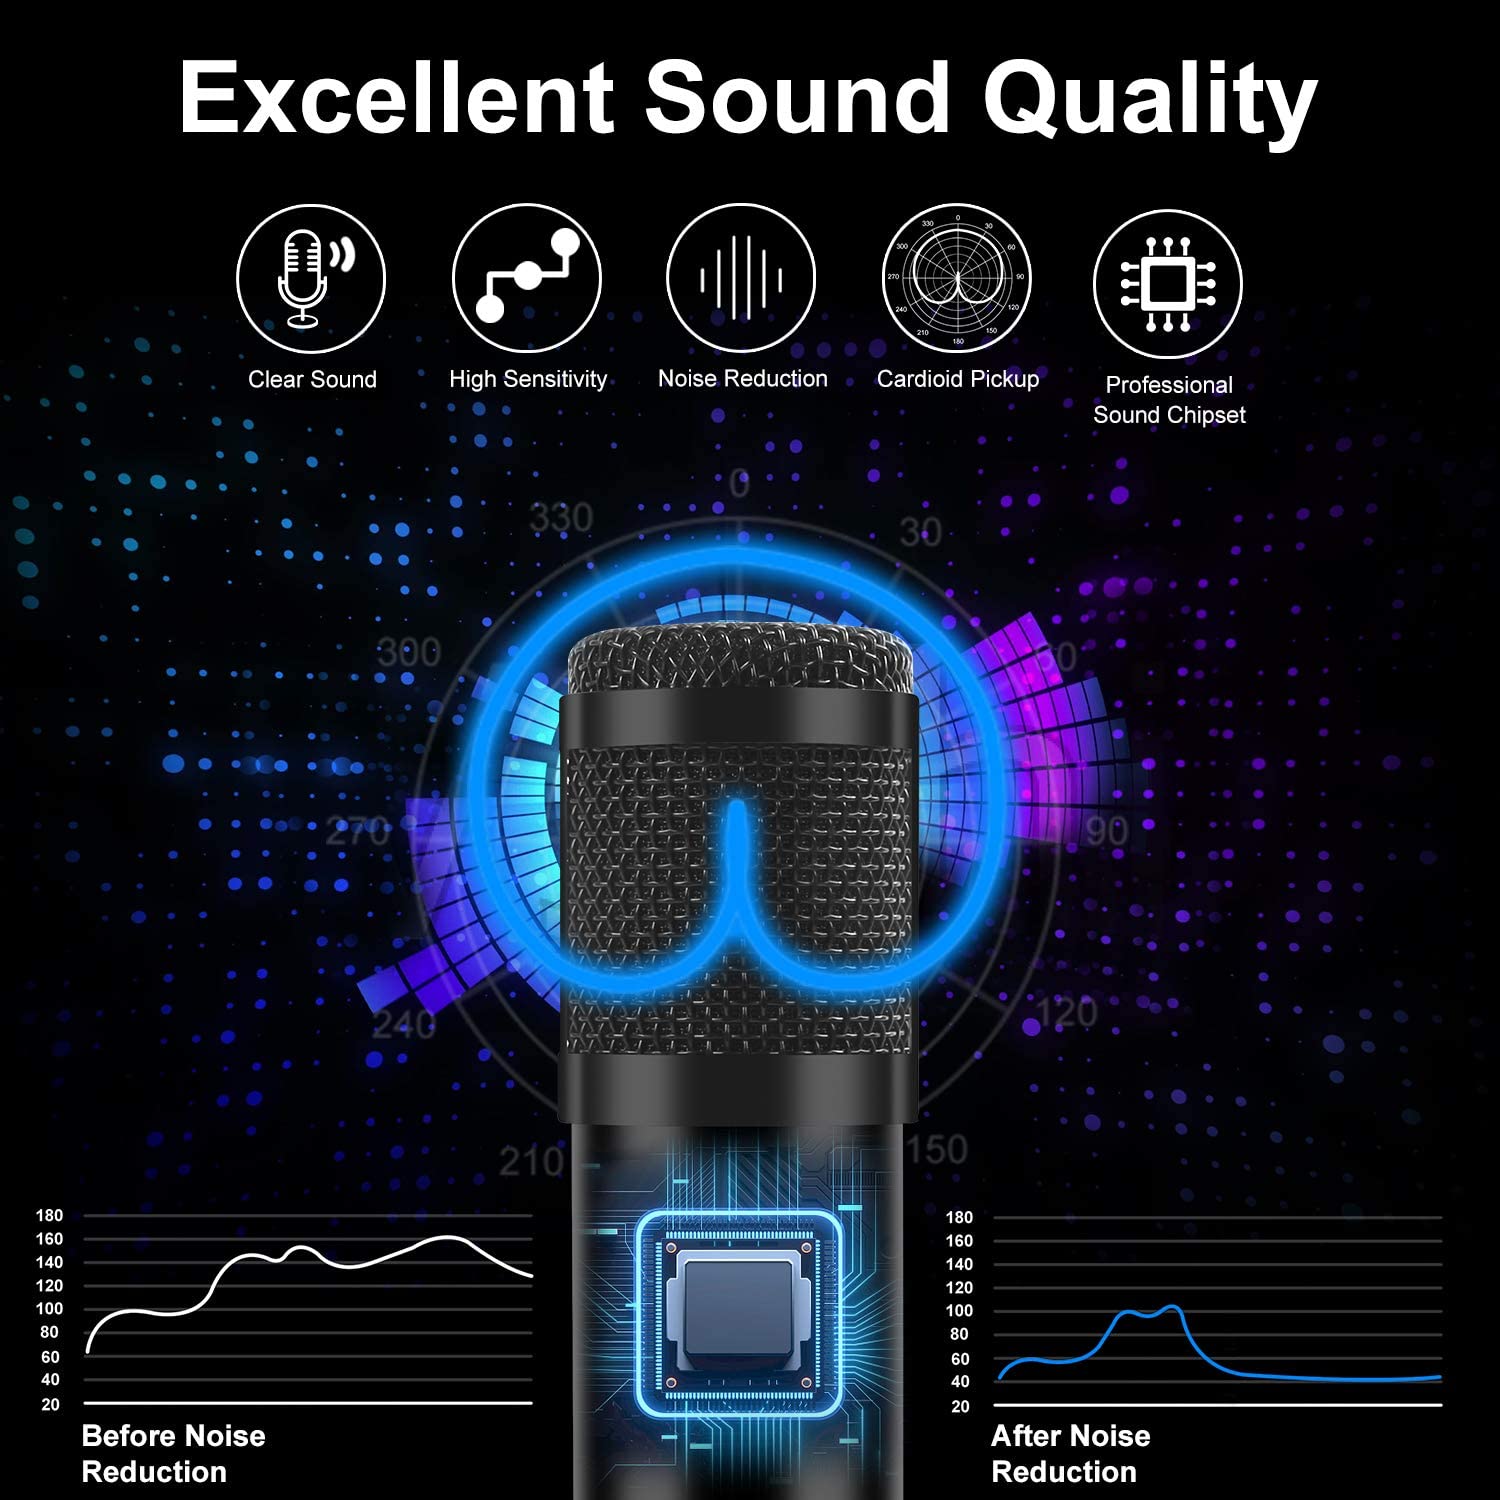 USB Condenser Microphone for Computer PC 192KHZ/24BIT Professional Cardioid Microphone Kit with Adjustable Scissor Arm Stand Shock Mount Pop Filter for Karaoke, YouTube, Gaming Recording - image 4 of 8